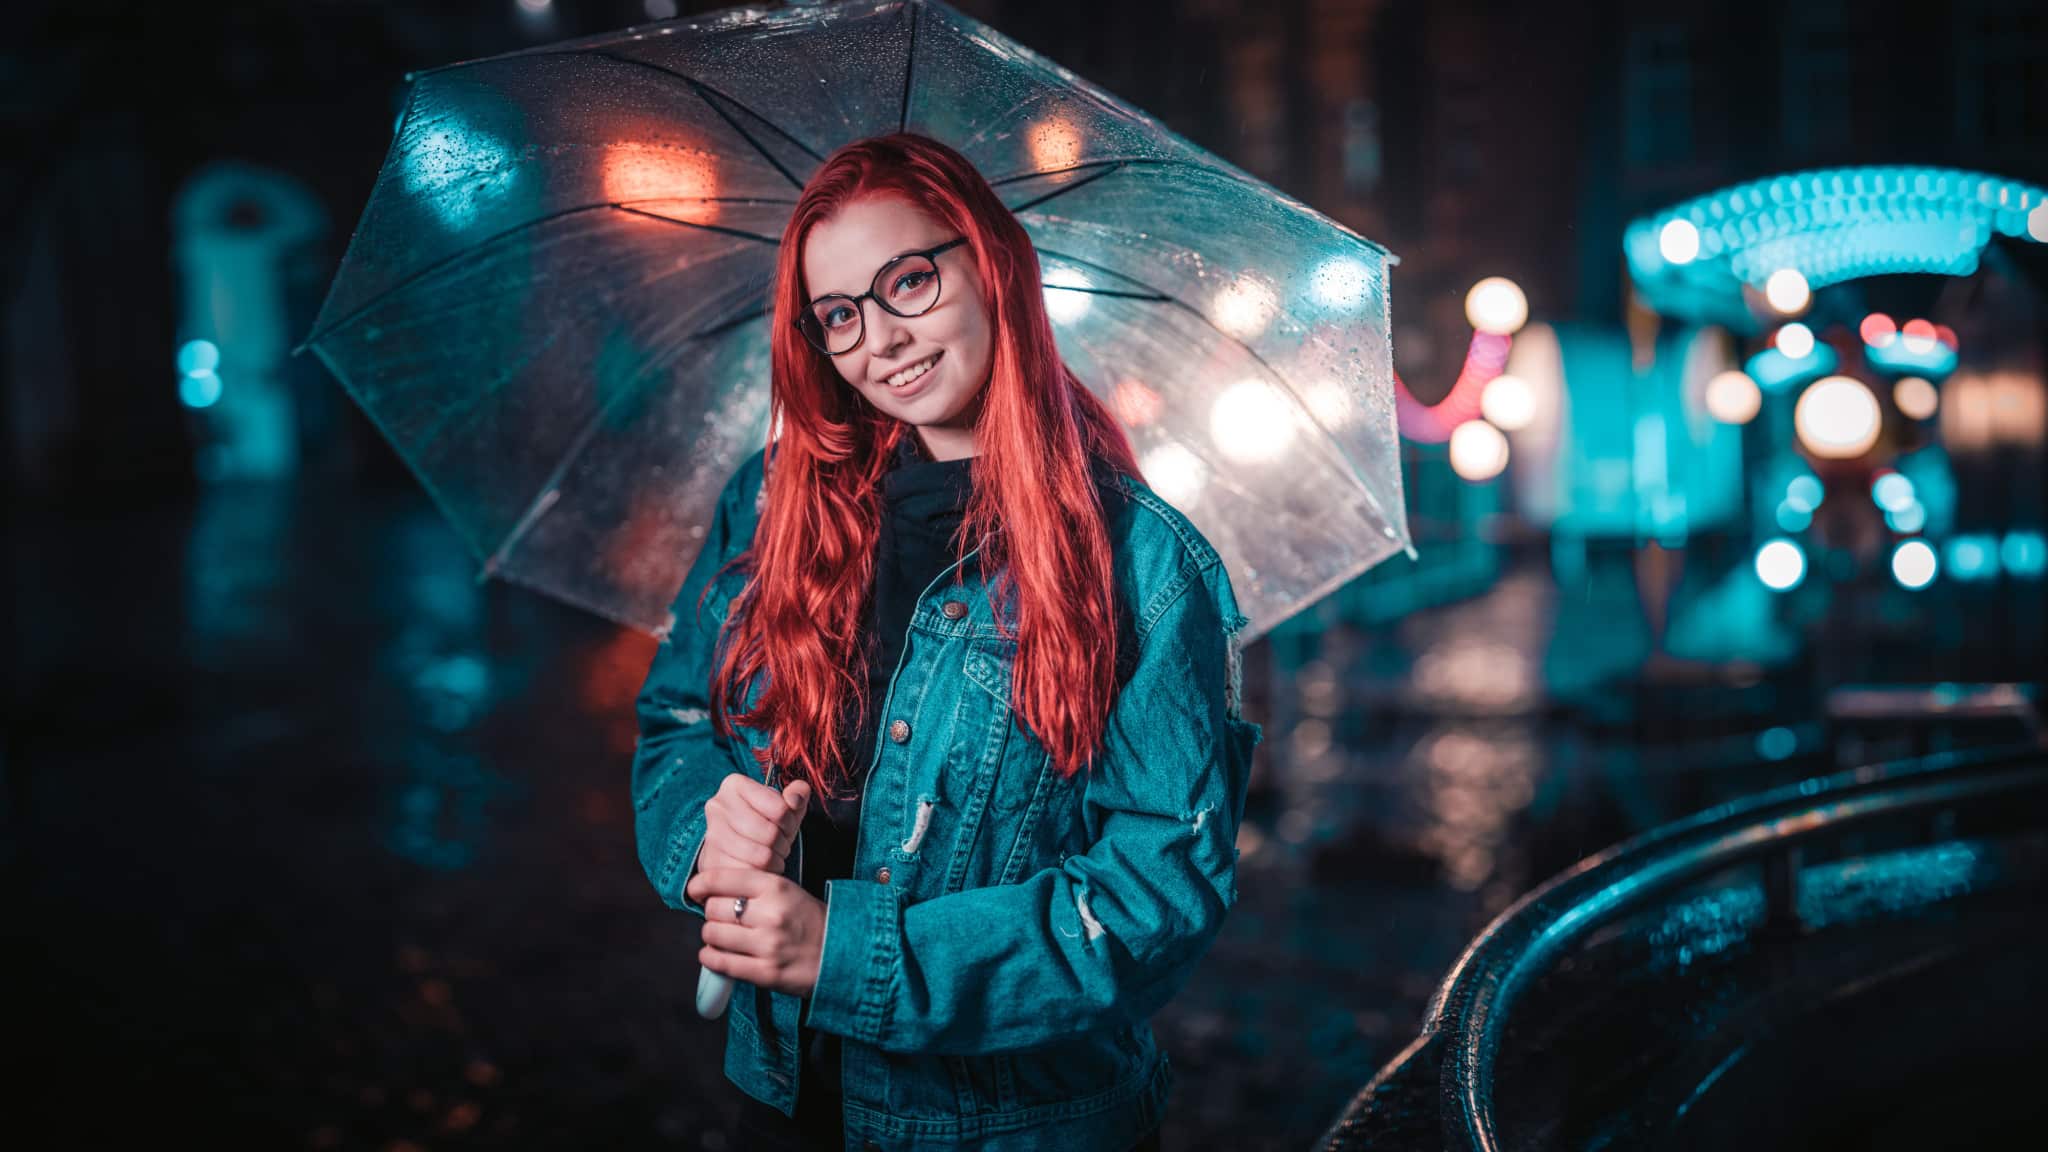 How Can You Get Stronger Bokeh? - girl with umbrella